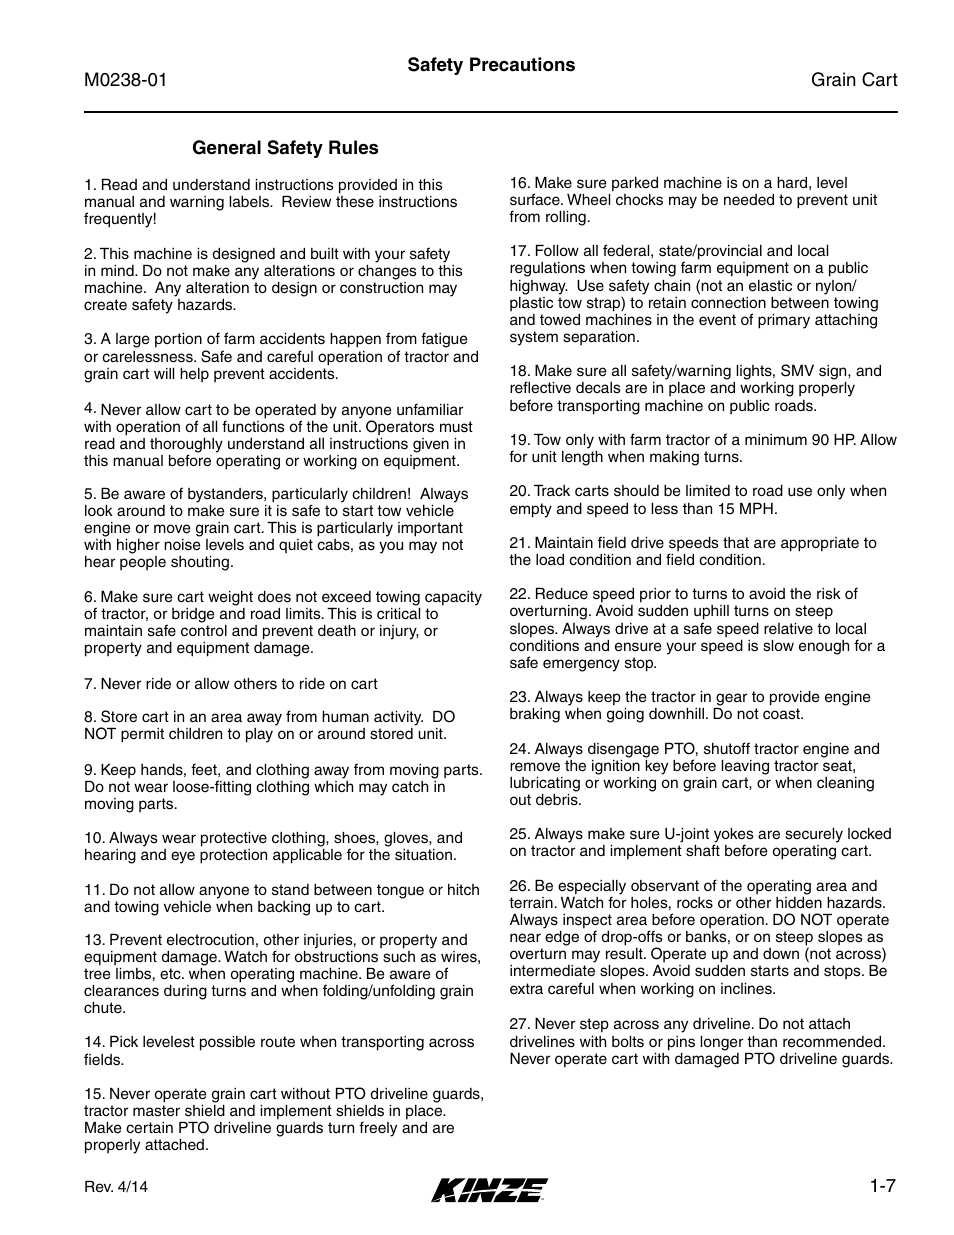 General safety rules, Safety precautions, General safety rules -7 | Safety precautions -7 | Kinze Grain Carts Rev. 7/14 User Manual | Page 13 / 70